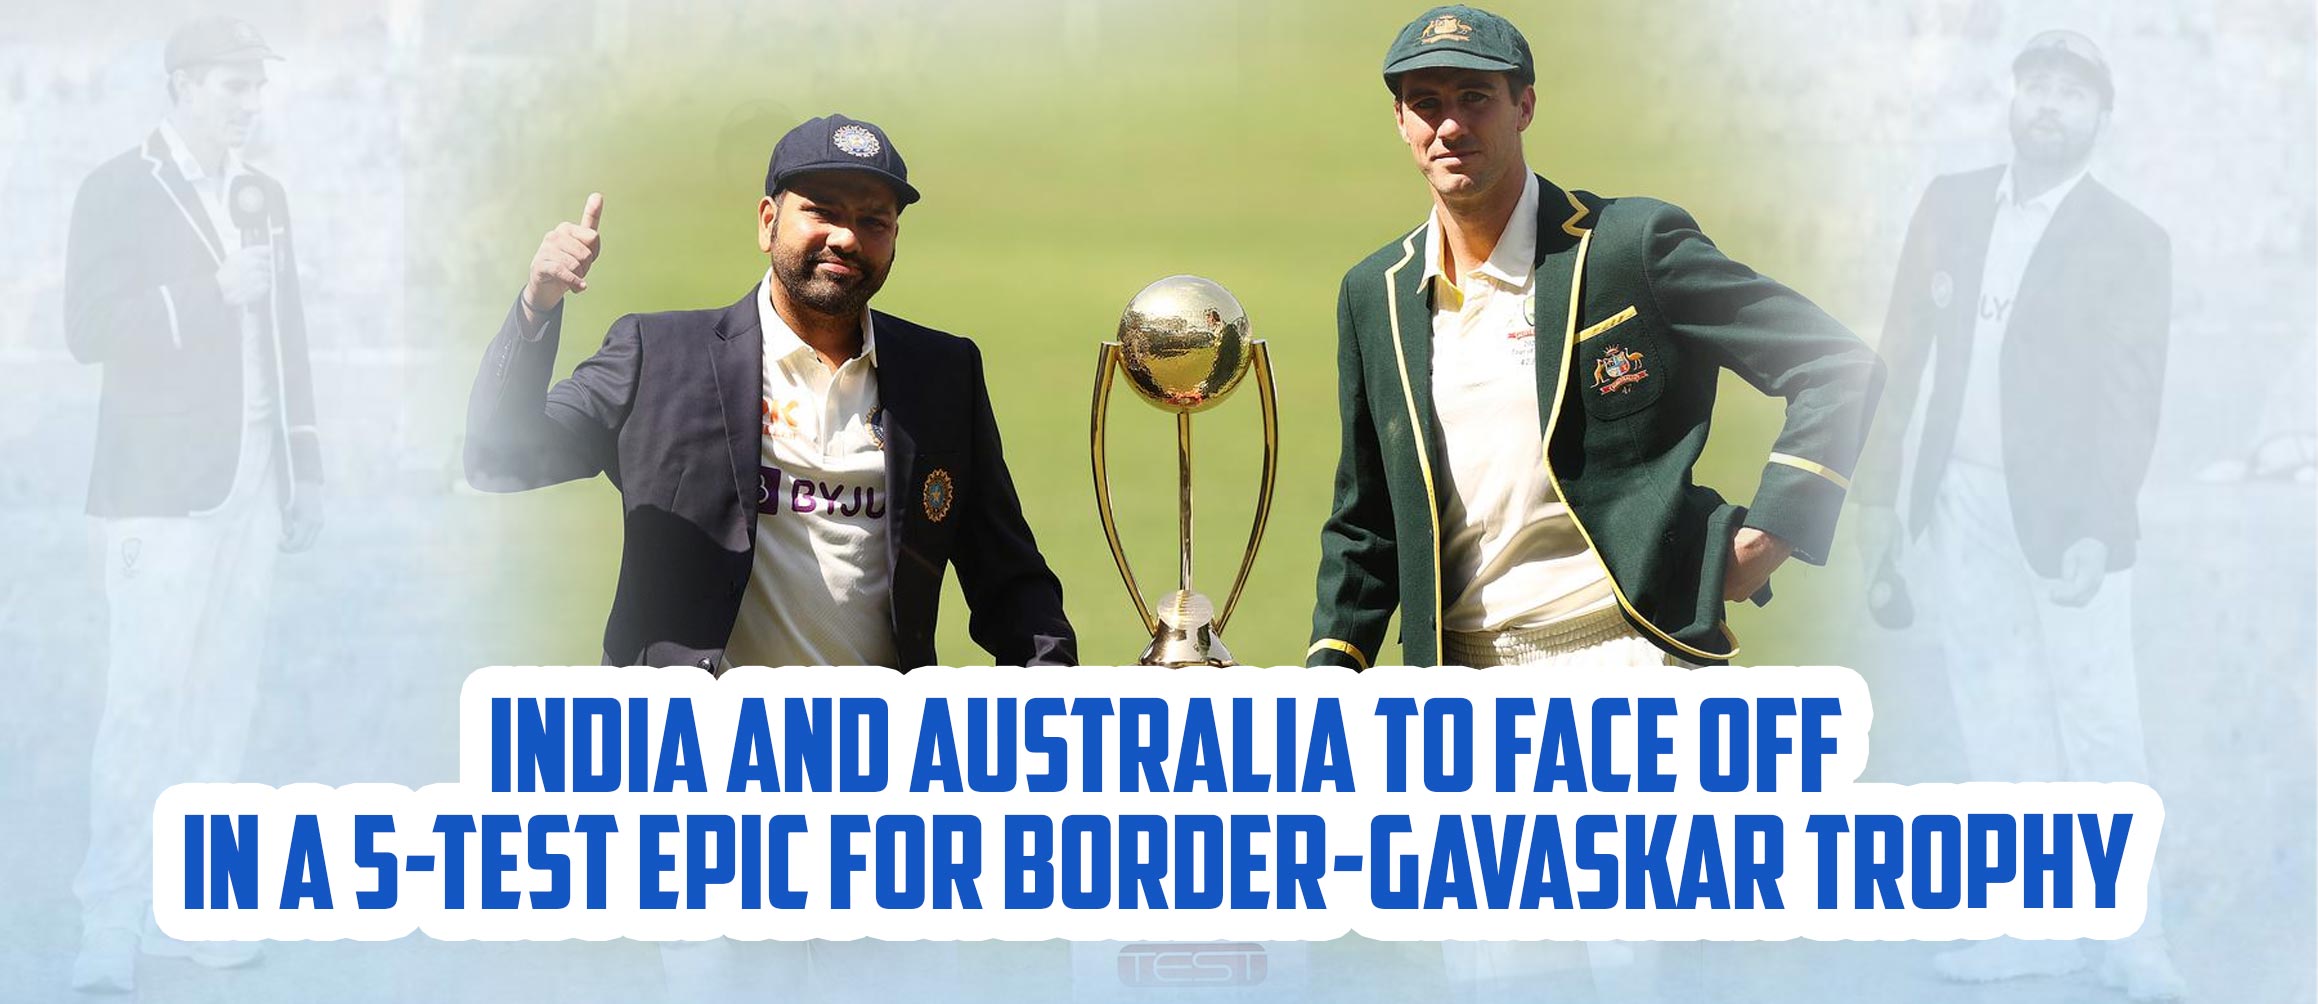 India and Australia to Face Off in a 5-Test Epic for Border-Gavaskar Trophy